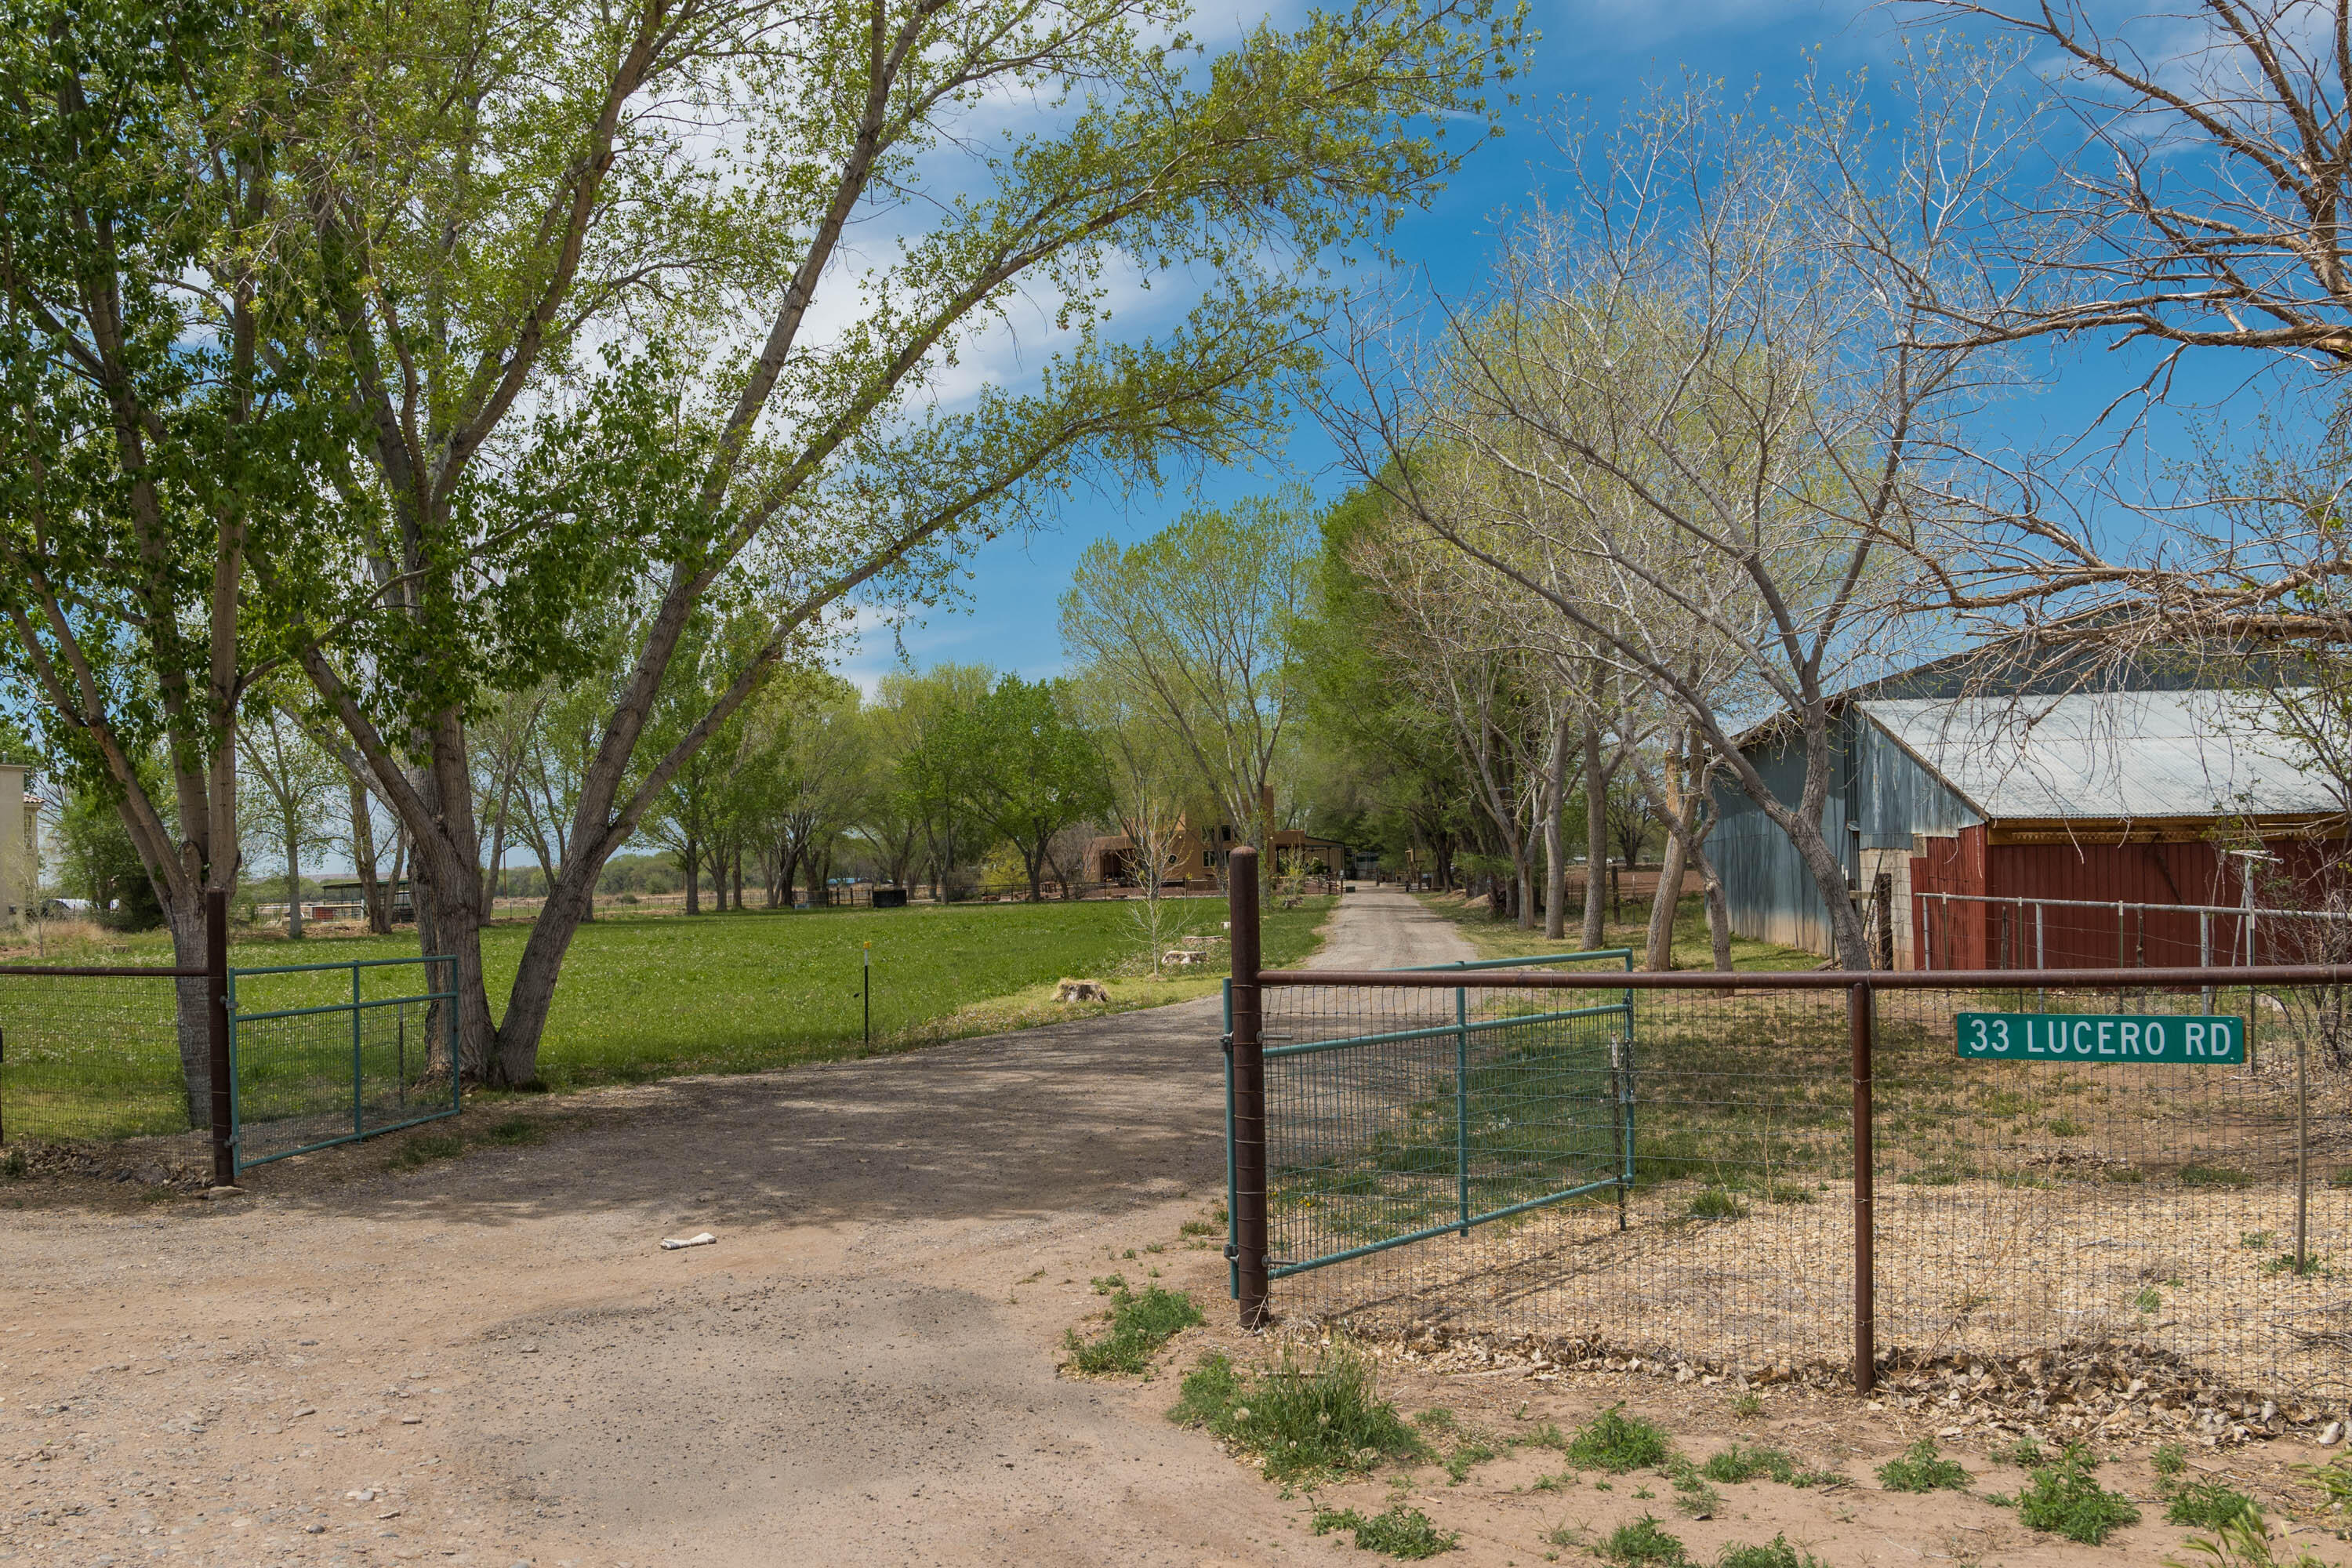 This incredible custom home is located in a beautiful pastoral country setting. Enjoy the privacy afforded with over 4 acres of space located directly next to an acequia. The entire property is fenced and gated. Canopies of mature trees and acres of lush pasture create a stunning entrance to this property. Upon entering the custom home, you will love the bright and open feel with soaring ceilings. Classic Southwestern charm abounds with beautiful wood ceilings with Vigas, 2 Kiva fireplaces, stained concrete floors, and beautiful custom cabinetry. The kitchen is beautifully appointed with rich granite and stainless steel appliances. There is a heated garage/workshop/casita not included in the square footage. Plenty of room for horses with stables in place. This is truly a great property!